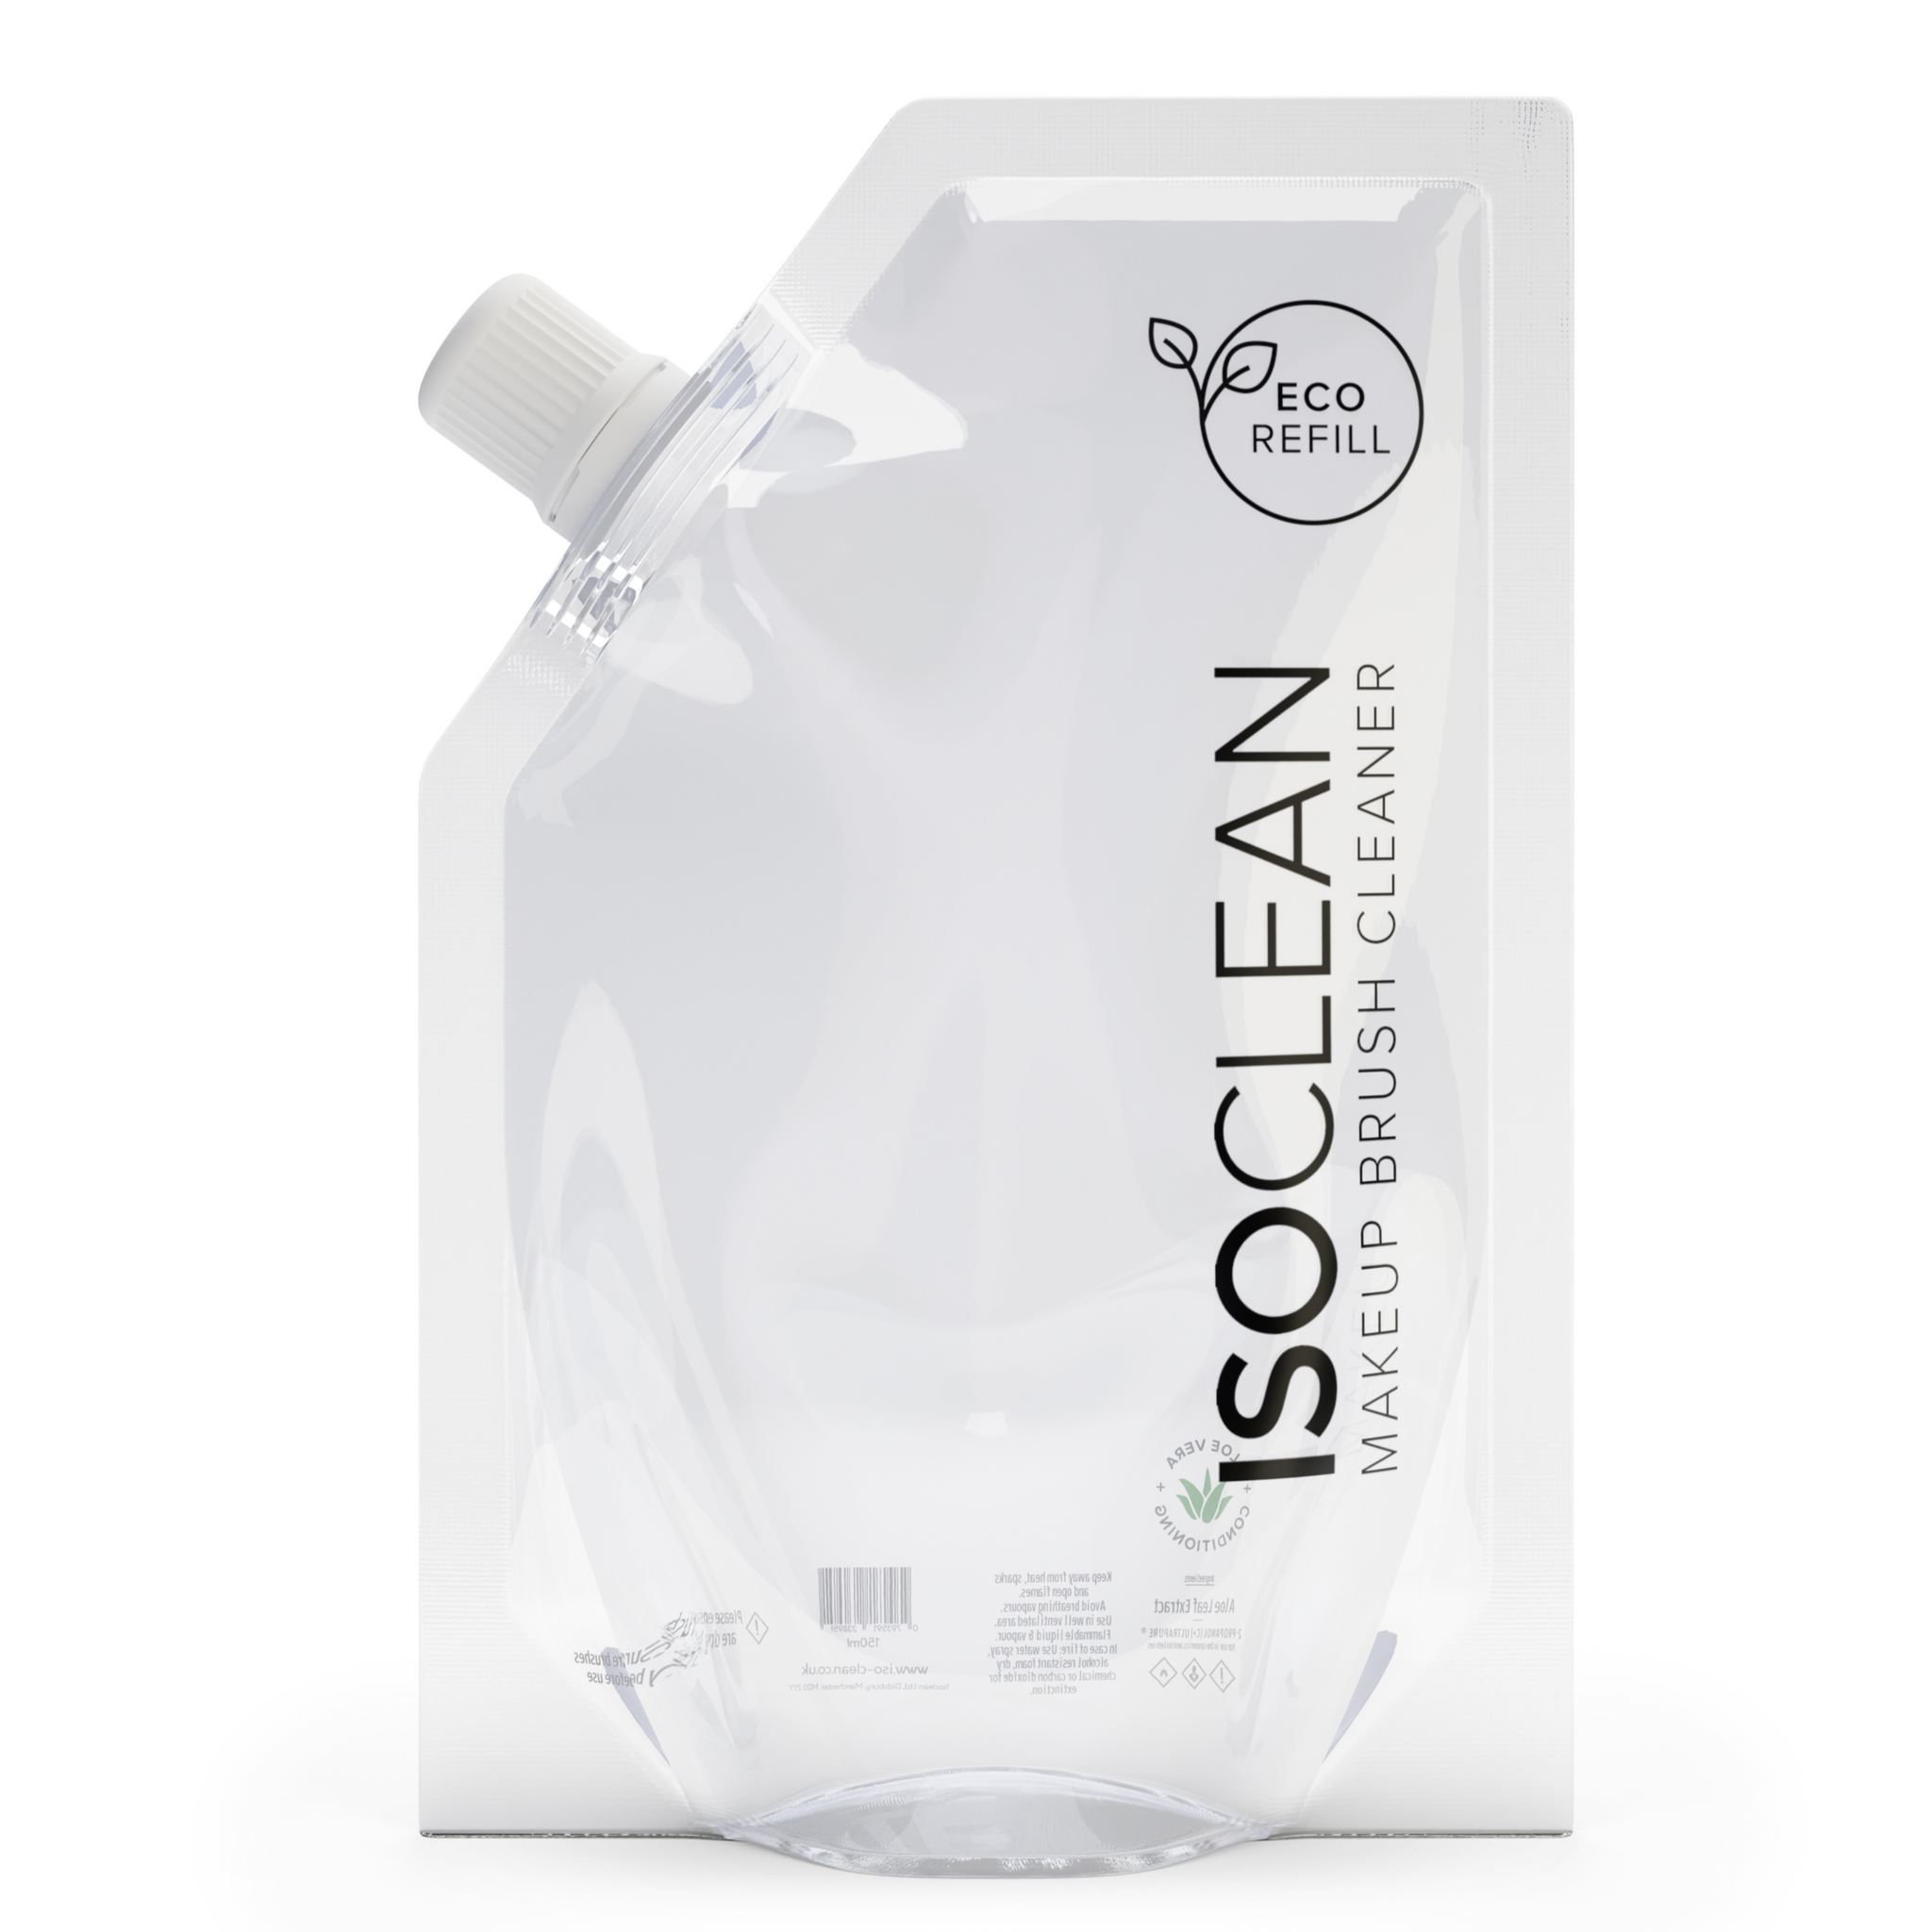 ISOCLEAN MAKEUP BRUSH CLEANER - ECO REFILL